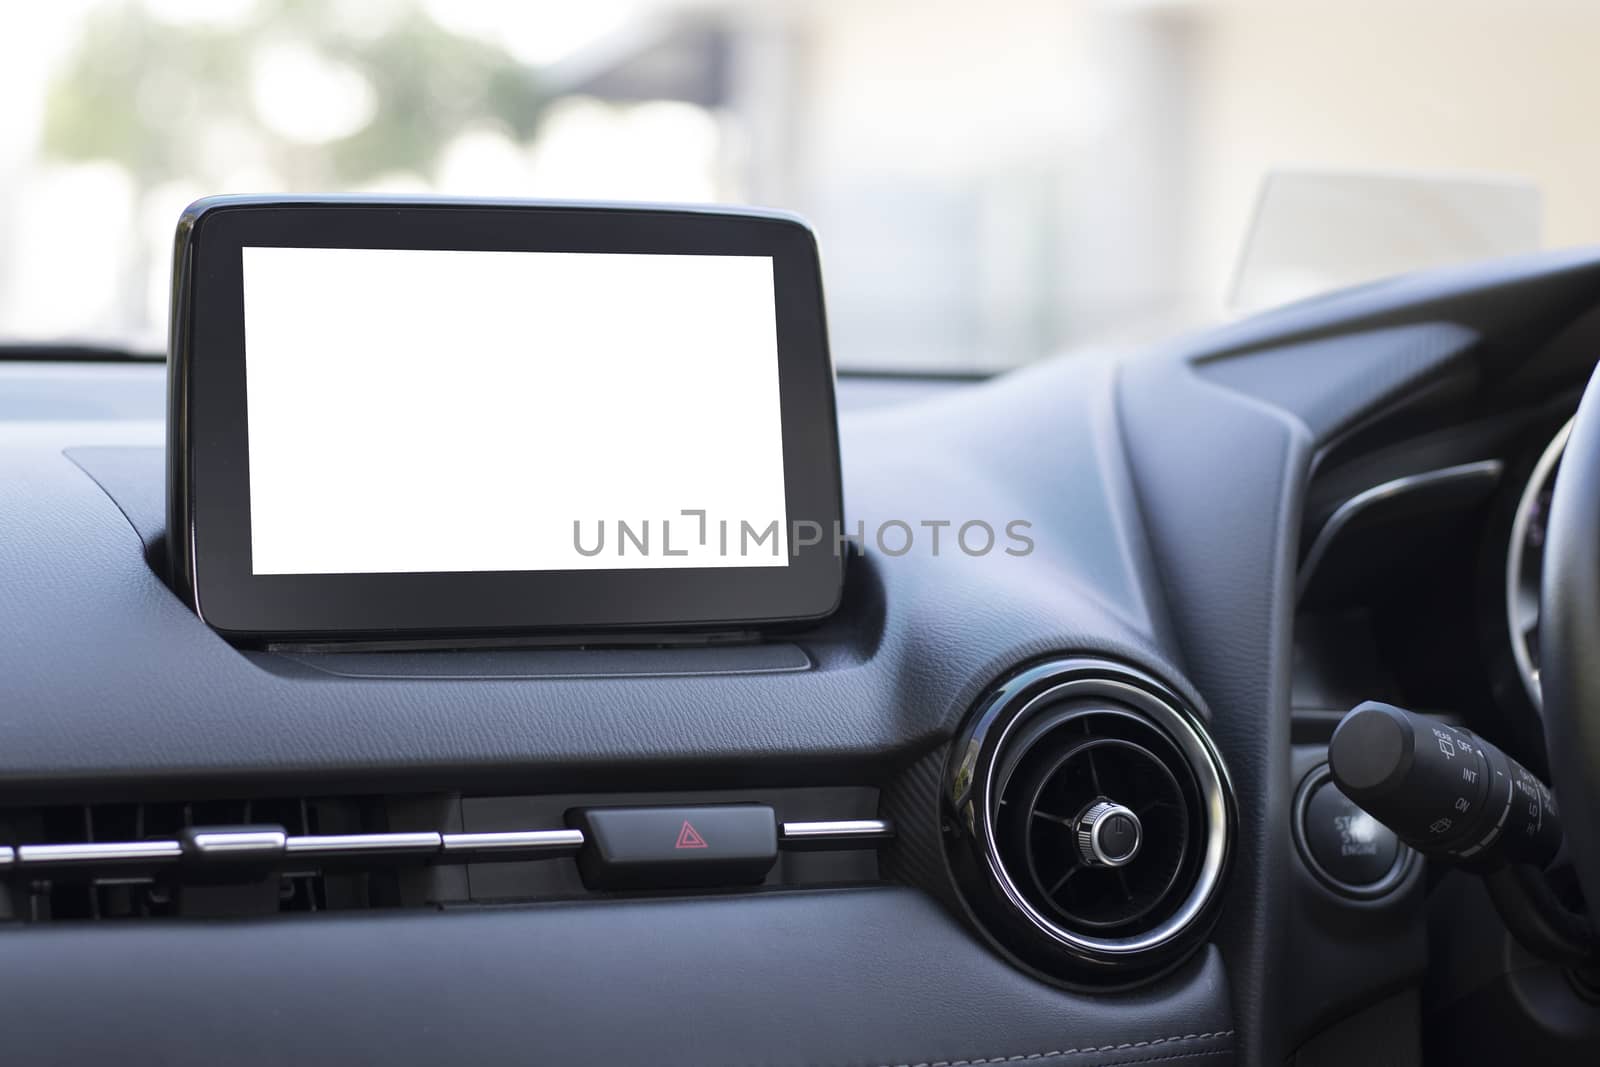 Touch screen monitor for using various applications such as entertainment,communications,navigation. Touch screen for operating various car applications.